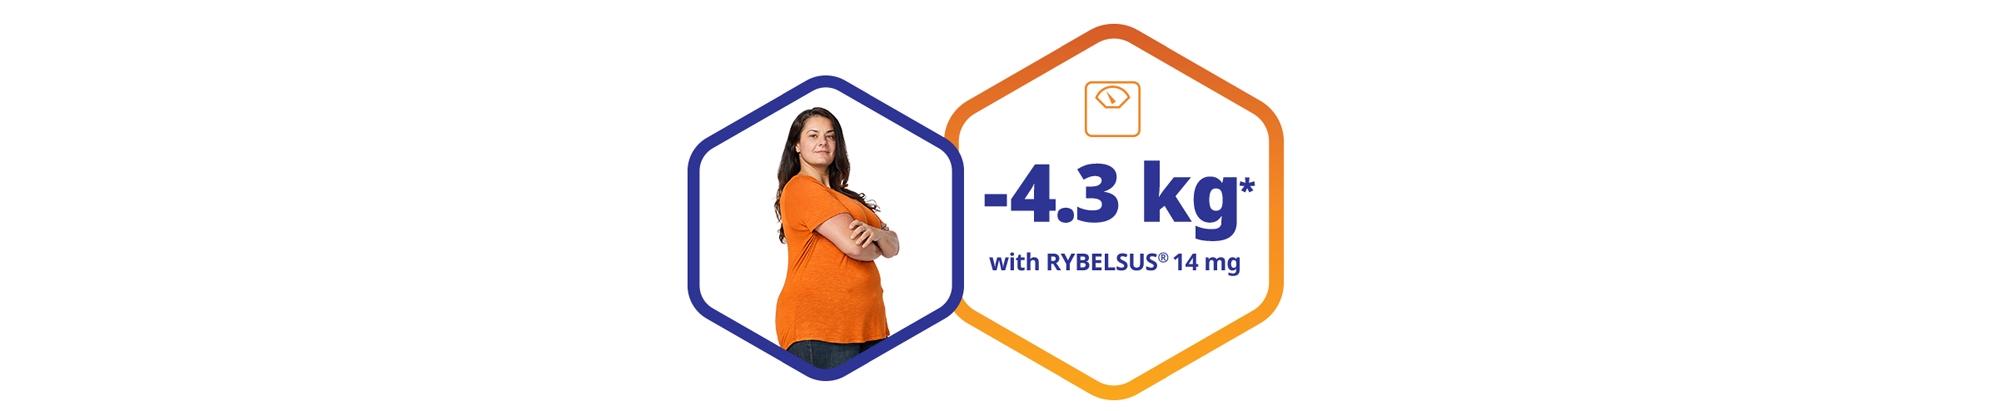 Patients on RYBELSUS® achieved consistent weight reductions of up to -4.3 kg